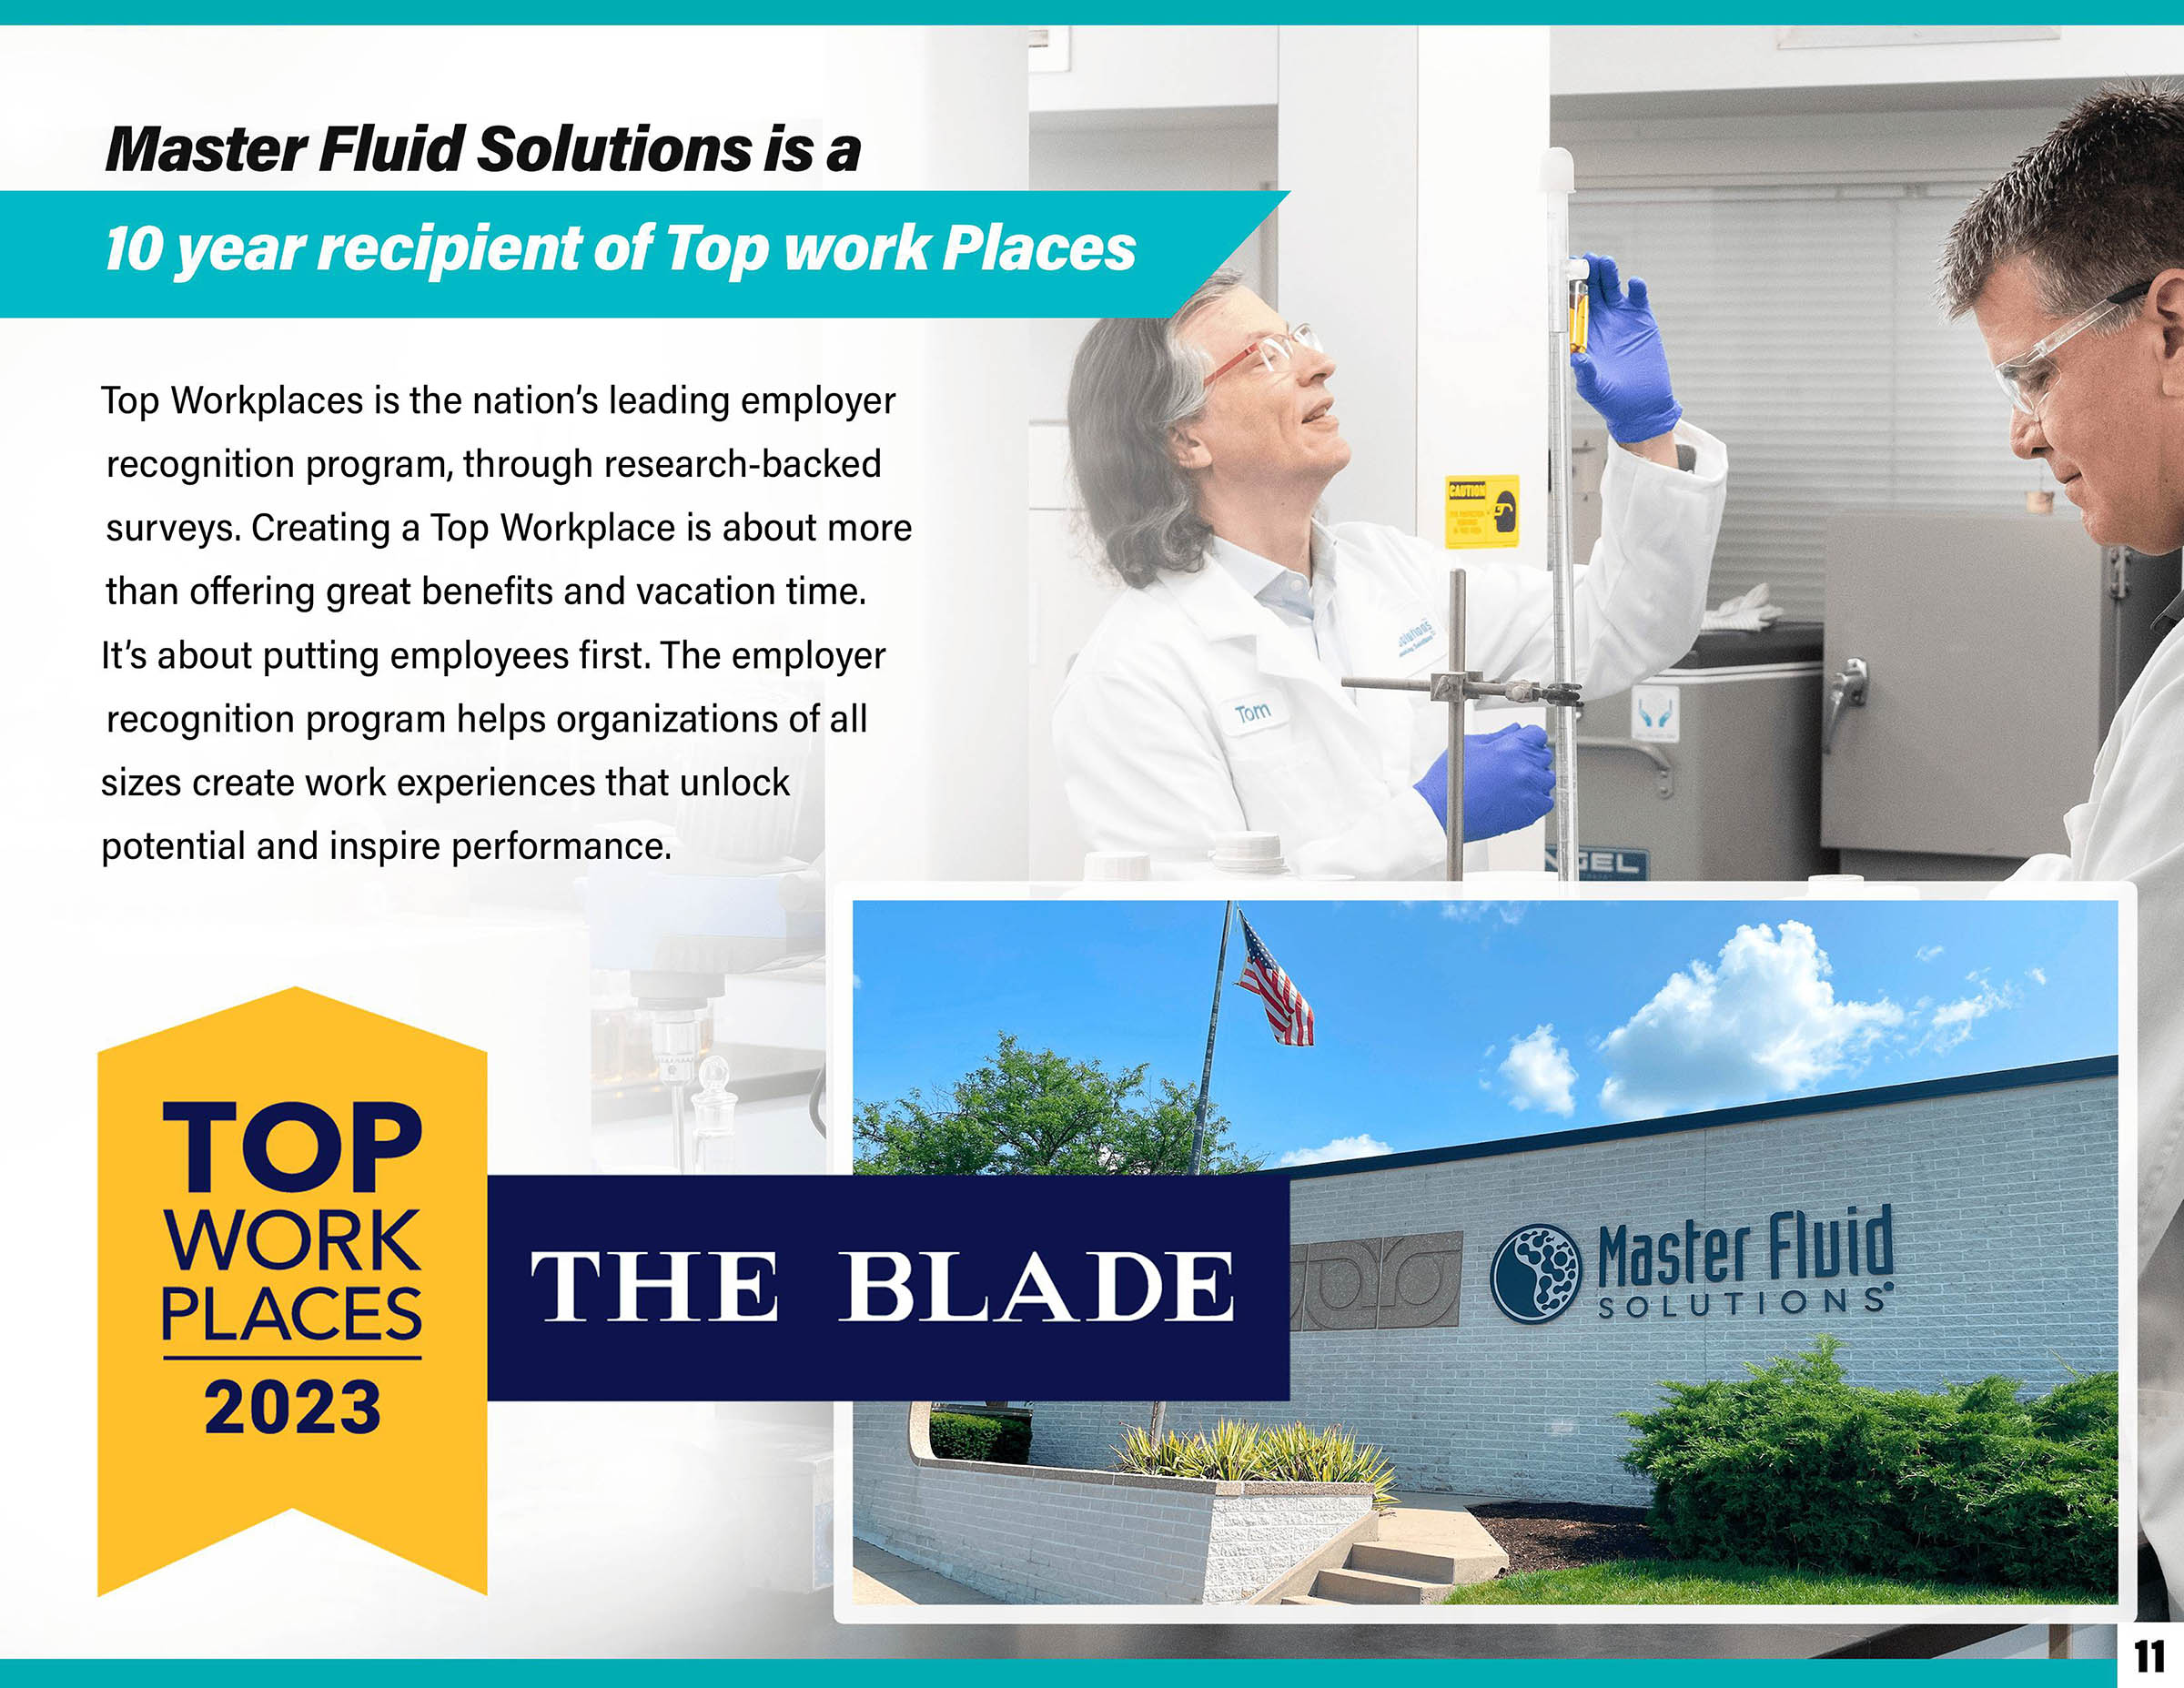 Sustainability Report - Master Fluid Solutions is a 10 year recipient of Top Work Places